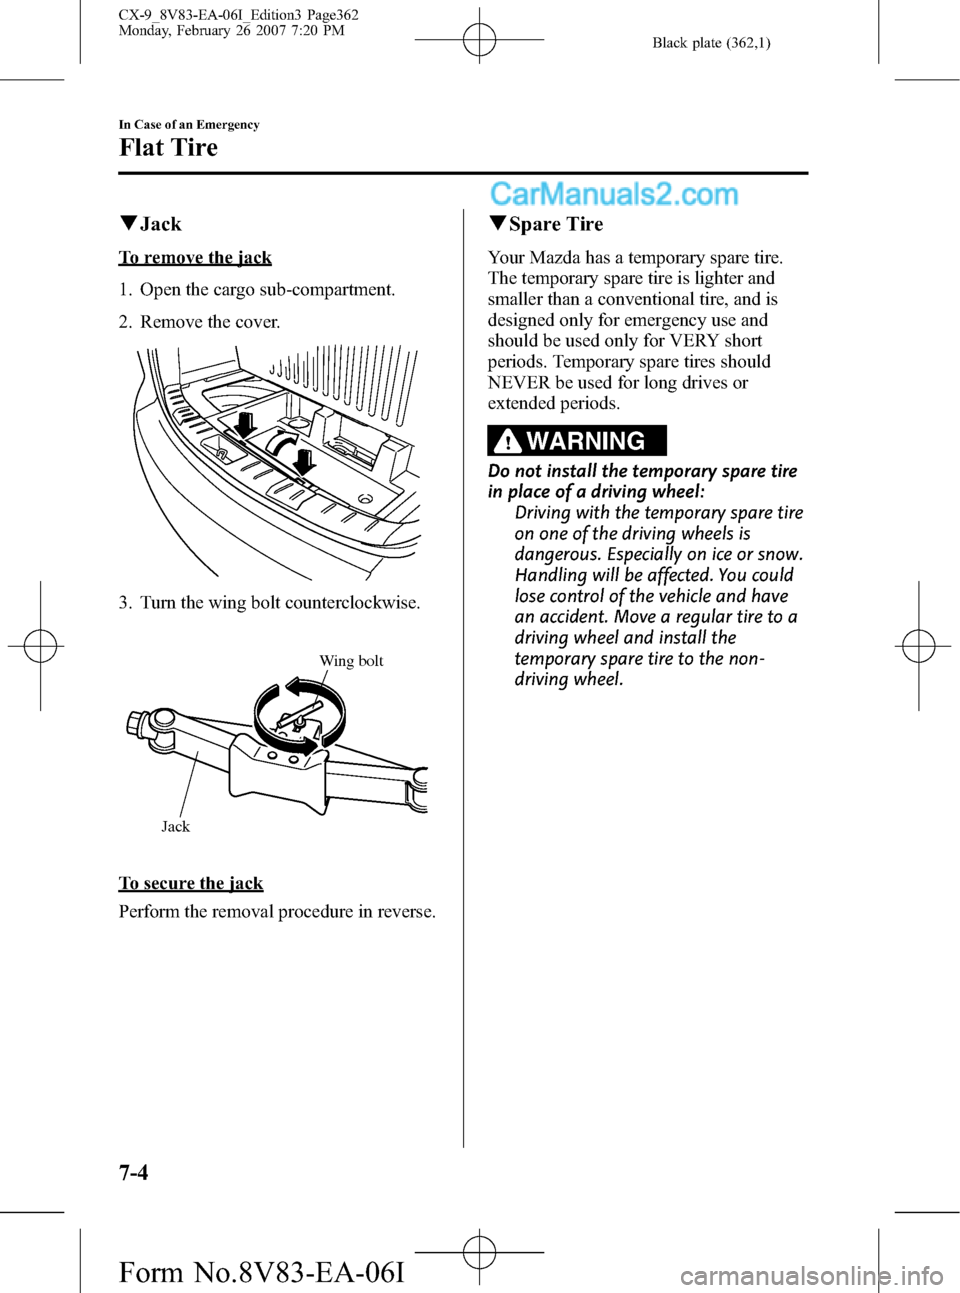 MAZDA MODEL CX-9 2007  Owners Manual (in English) Black plate (362,1)
qJack
To remove the jack
1. Open the cargo sub-compartment.
2. Remove the cover.
3. Turn the wing bolt counterclockwise.
Jack
Wing bolt
To secure the jack
Perform the removal proce